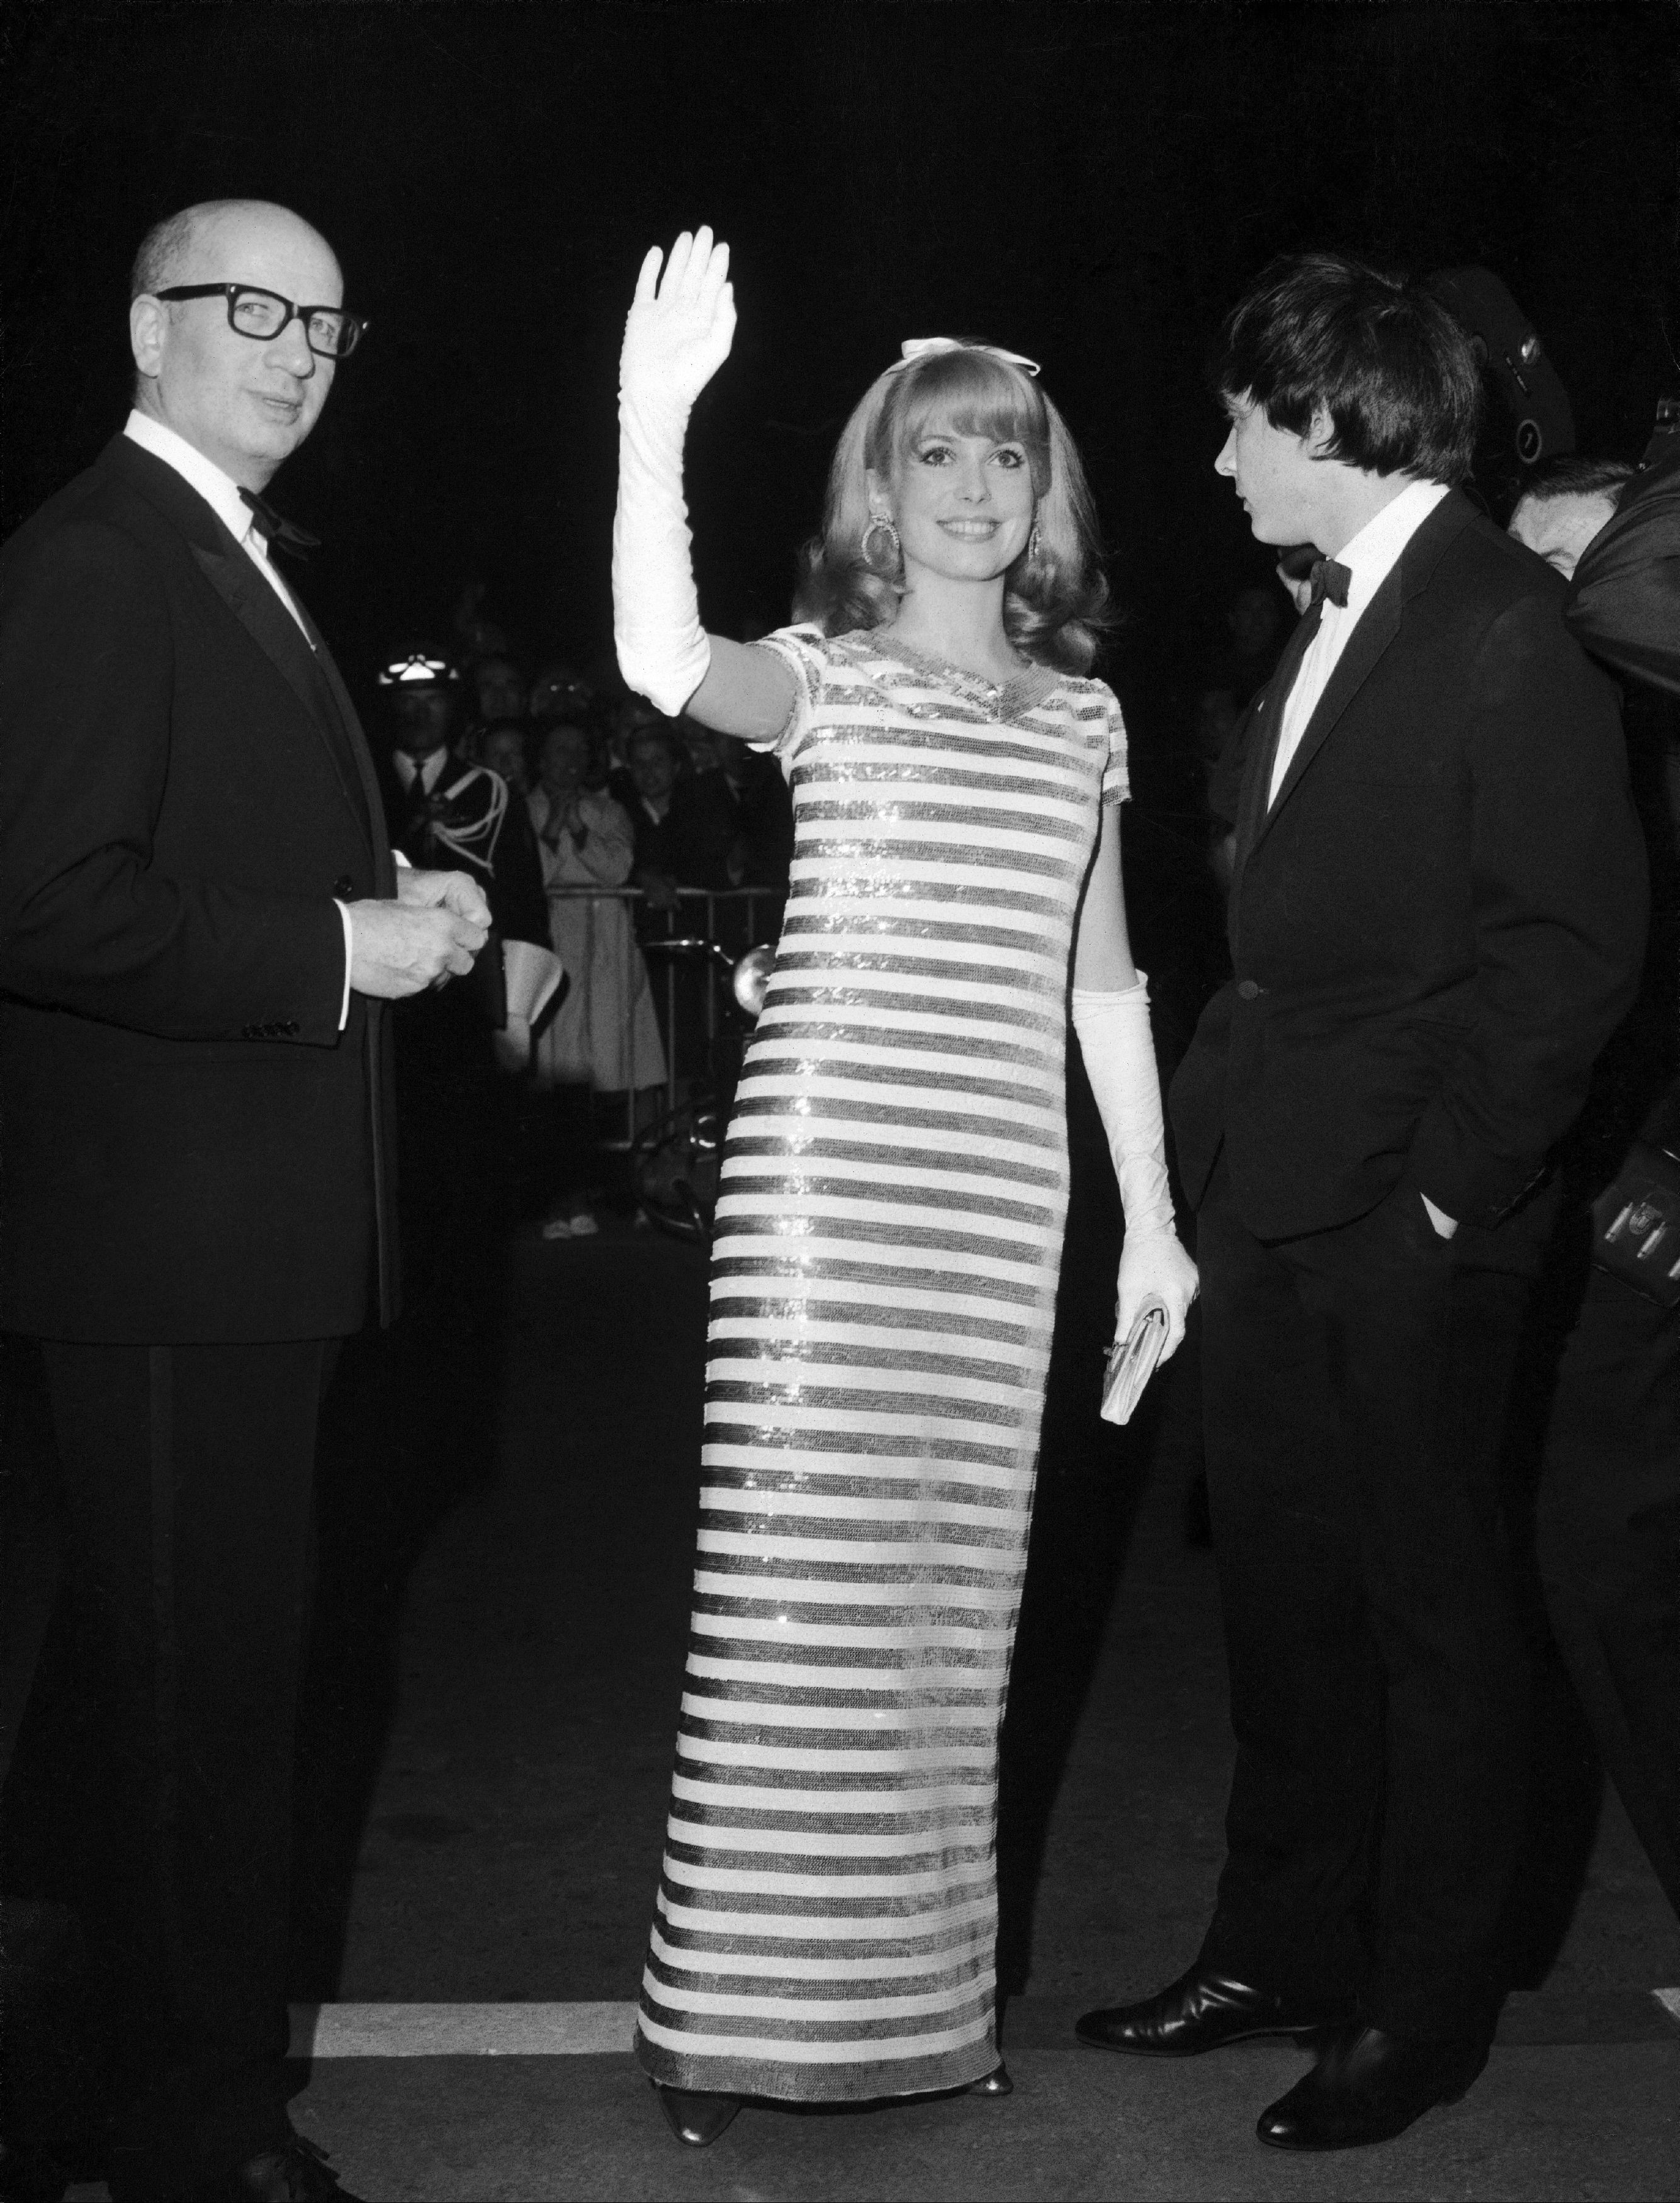 FRANCE - OCTOBER 05:  Catherine Deneuve Attends The Screening Of The Film Les Cendres By Andrzej Wajda At The Cannes Film Festival On May 6, 1966.  (Photo by Keystone-France/Gamma-Keystone via Getty Images) (Foto: Gamma-Keystone via Getty Images)